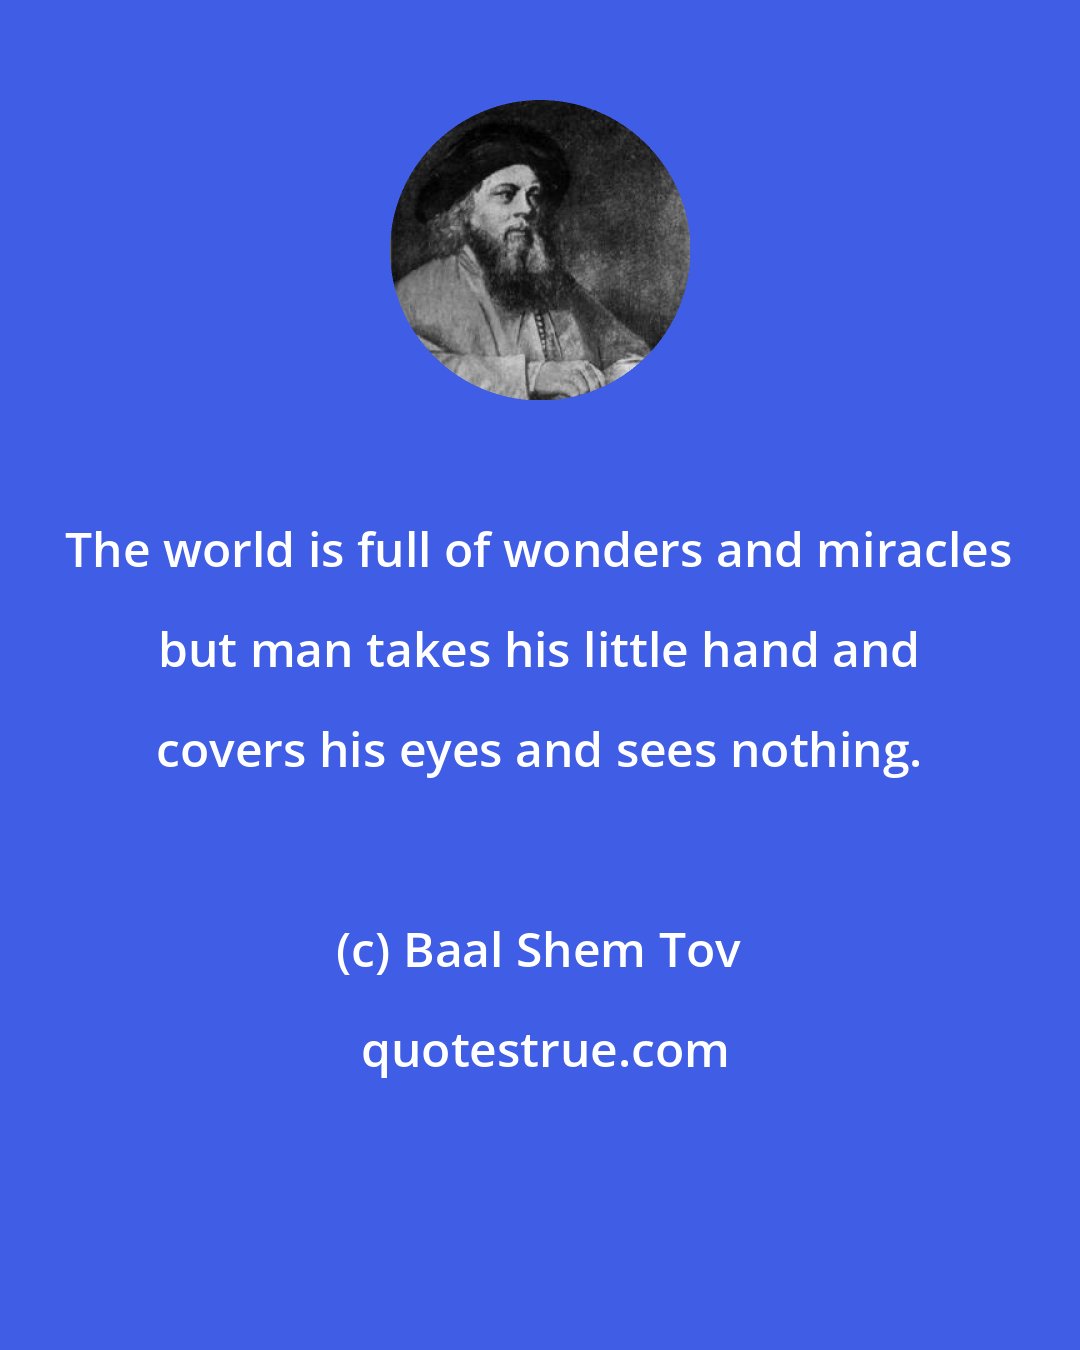 Baal Shem Tov: The world is full of wonders and miracles but man takes his little hand and covers his eyes and sees nothing.